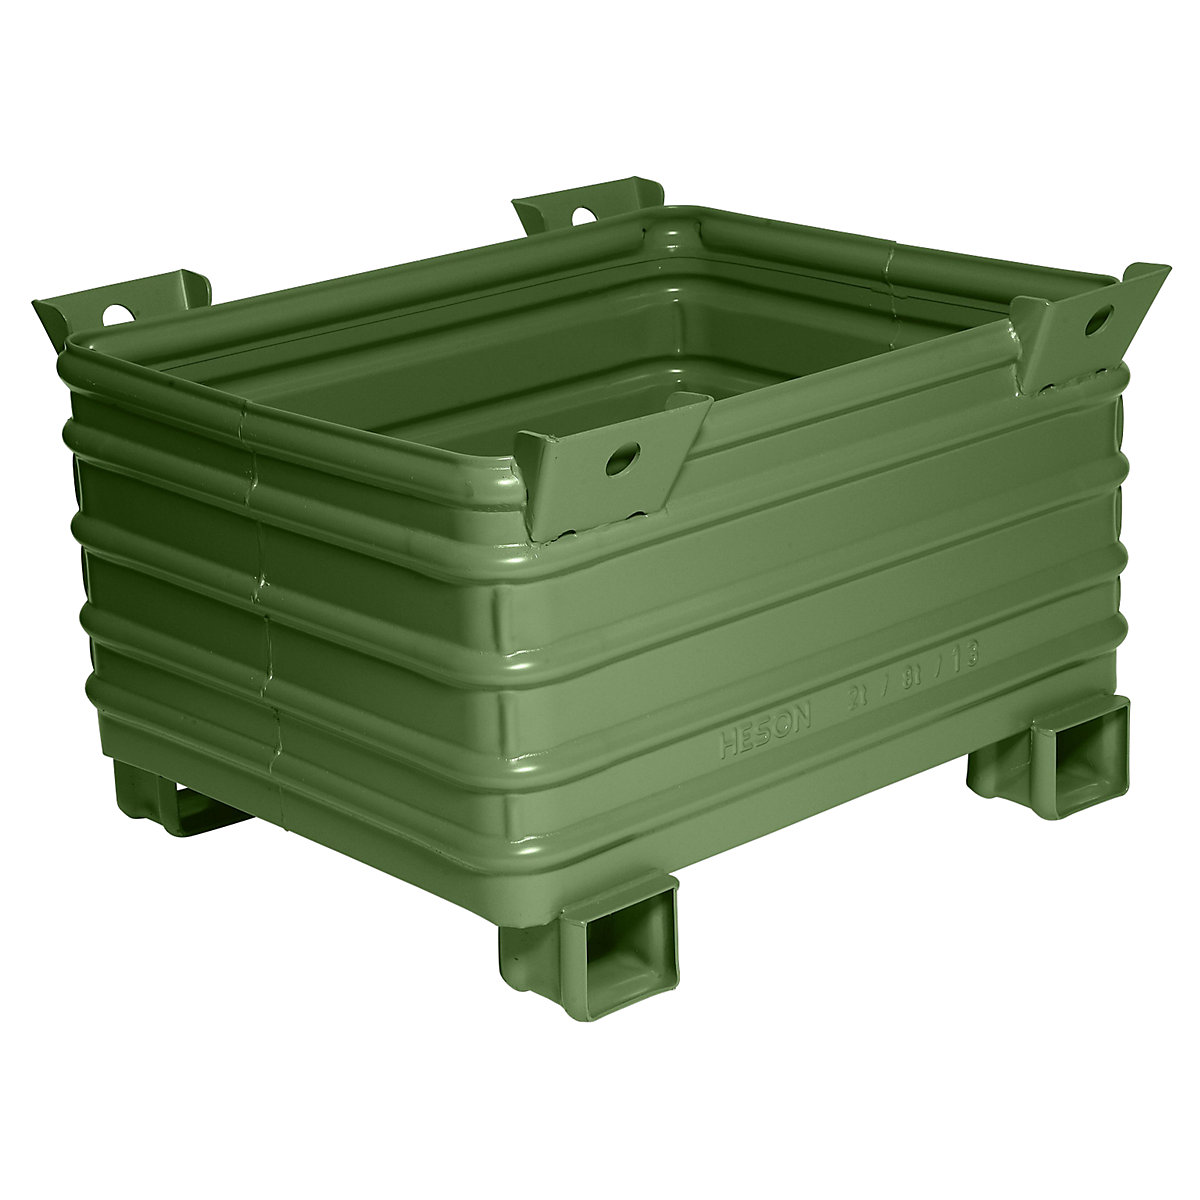 Heavy duty box pallet – Heson, WxL 800 x 1000 mm, with U-shaped feet, painted green, 1+ items-7